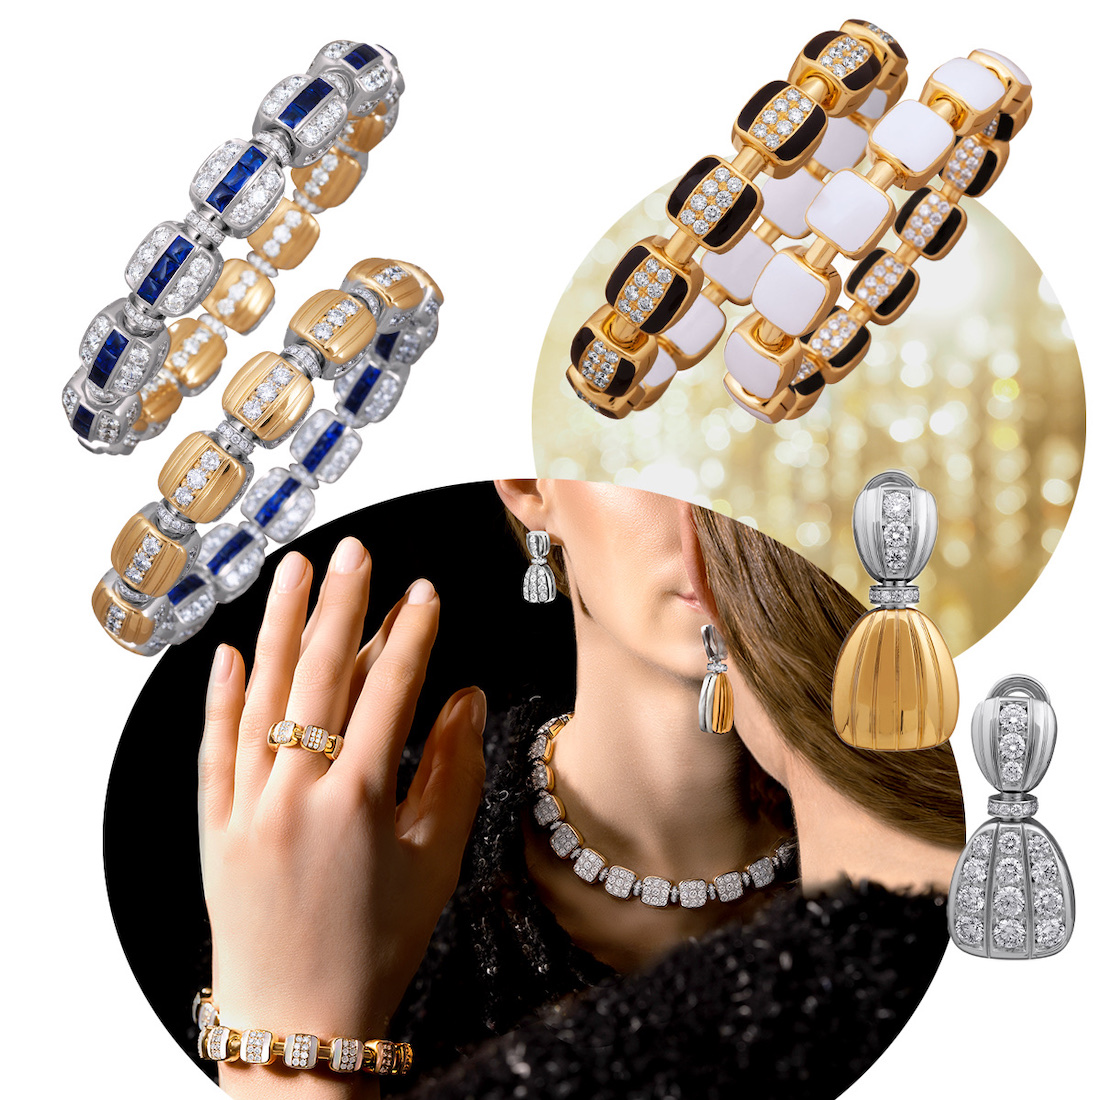 Clockwise from upper right – PICCHIOTTI Reversible Xpandable Black Onyx, White Ceramic, and Diamond earrings, PICCHIOTTI Reversible Gold and Diamond drop earrings, model wearing PICCHIOTTI Reversible Xpandable necklace, bracelet, and earrings, PICCHIOTTI Xpandable Sapphire, Diamonds, and Gold bracelet